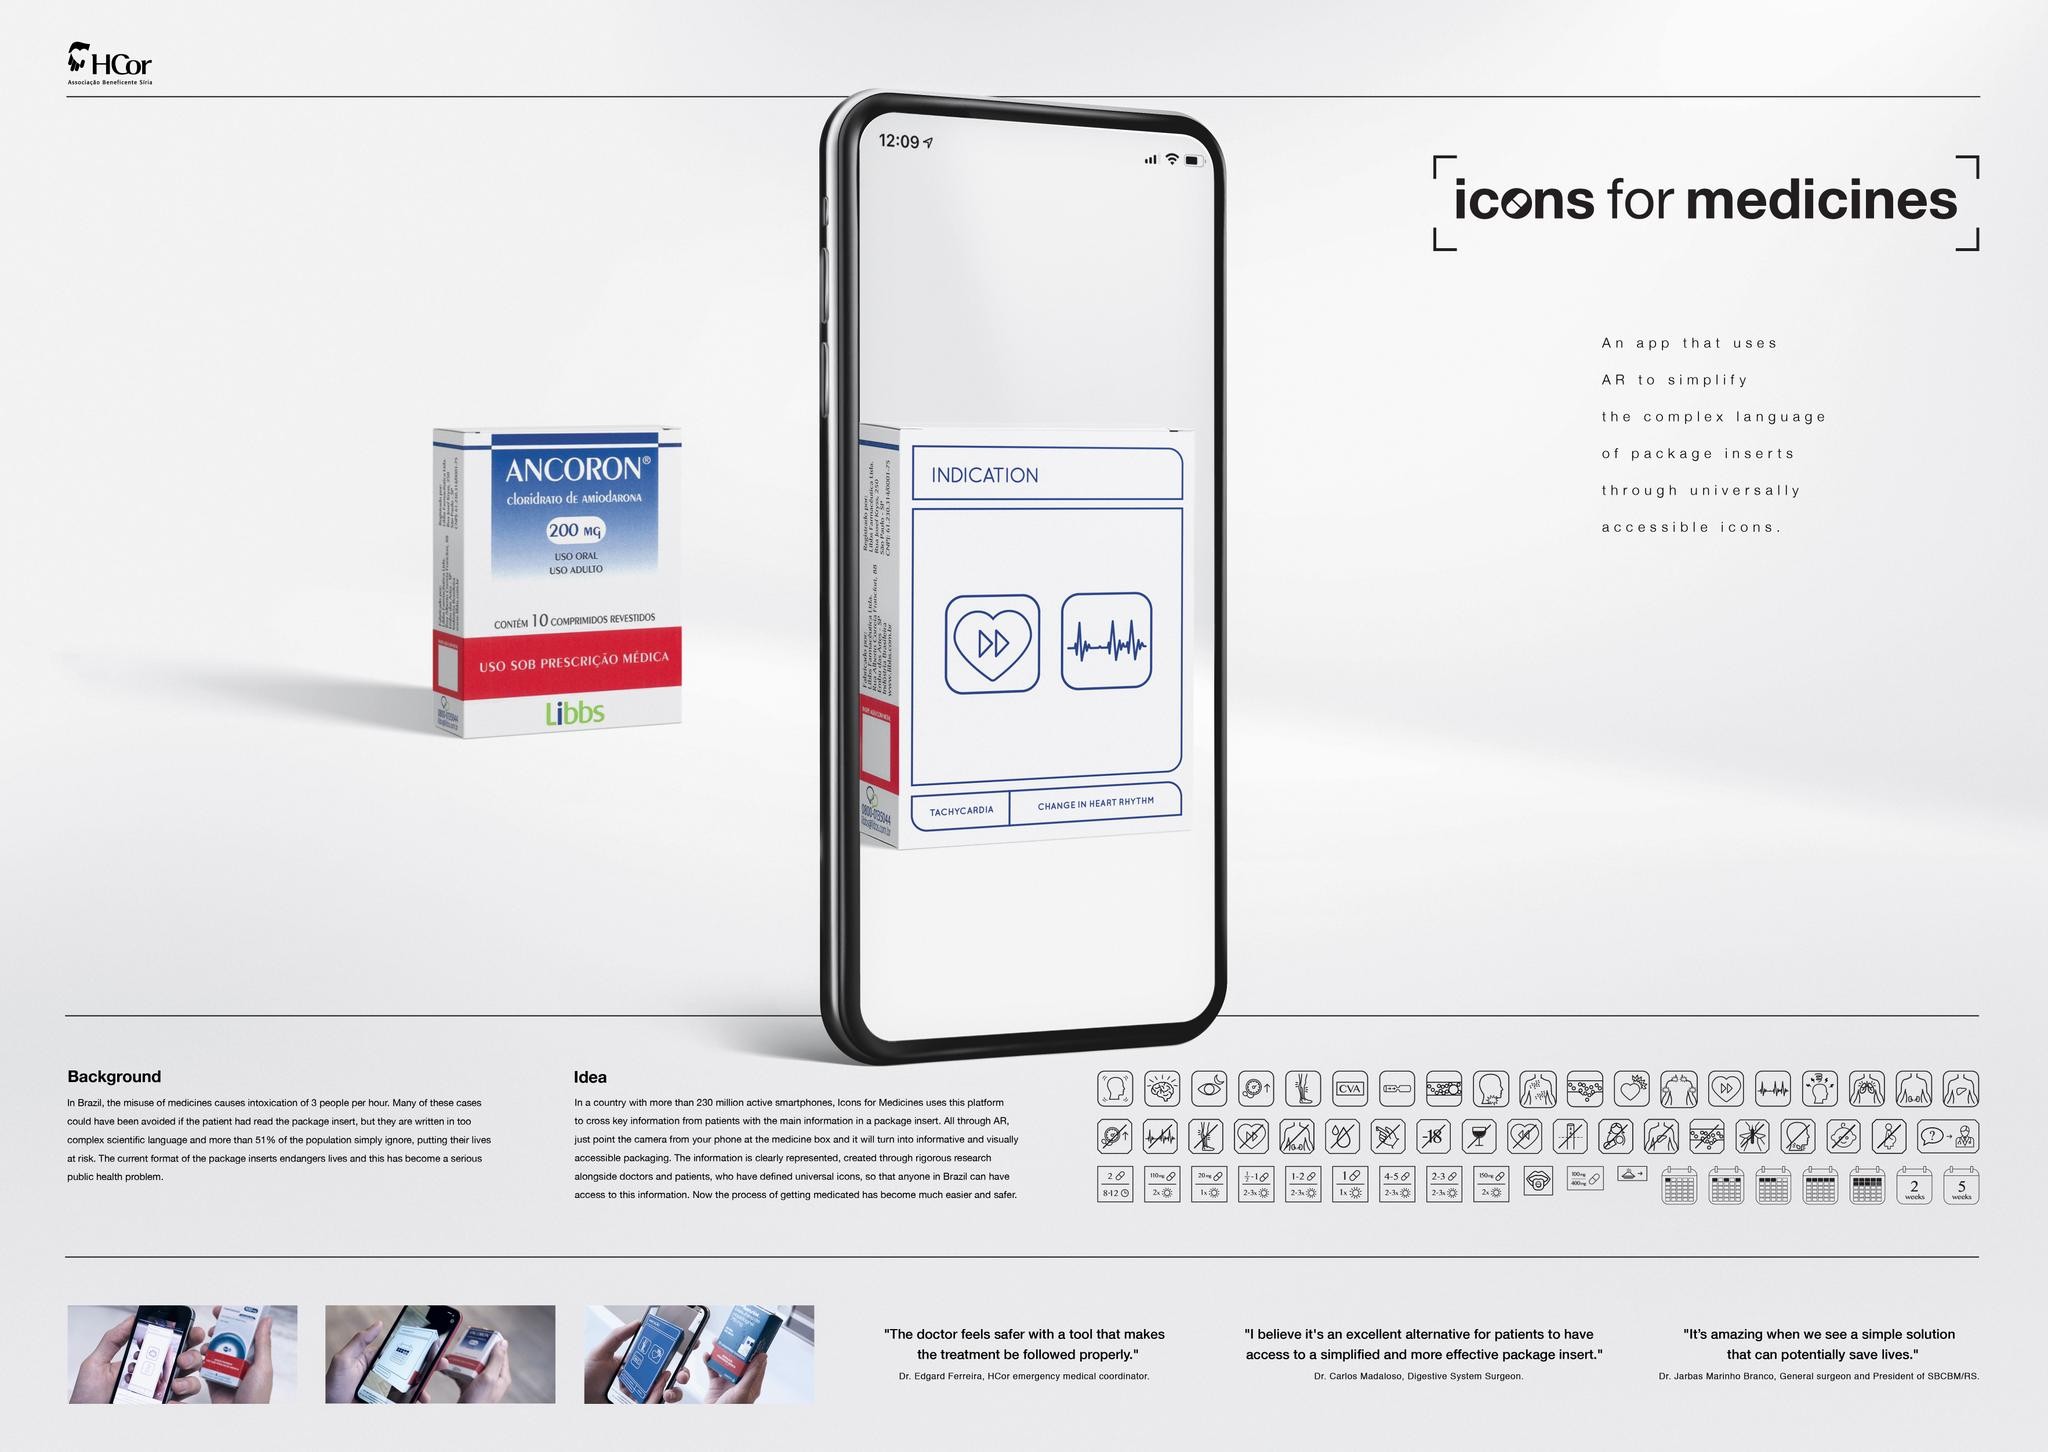 ICONS FOR MEDICINES